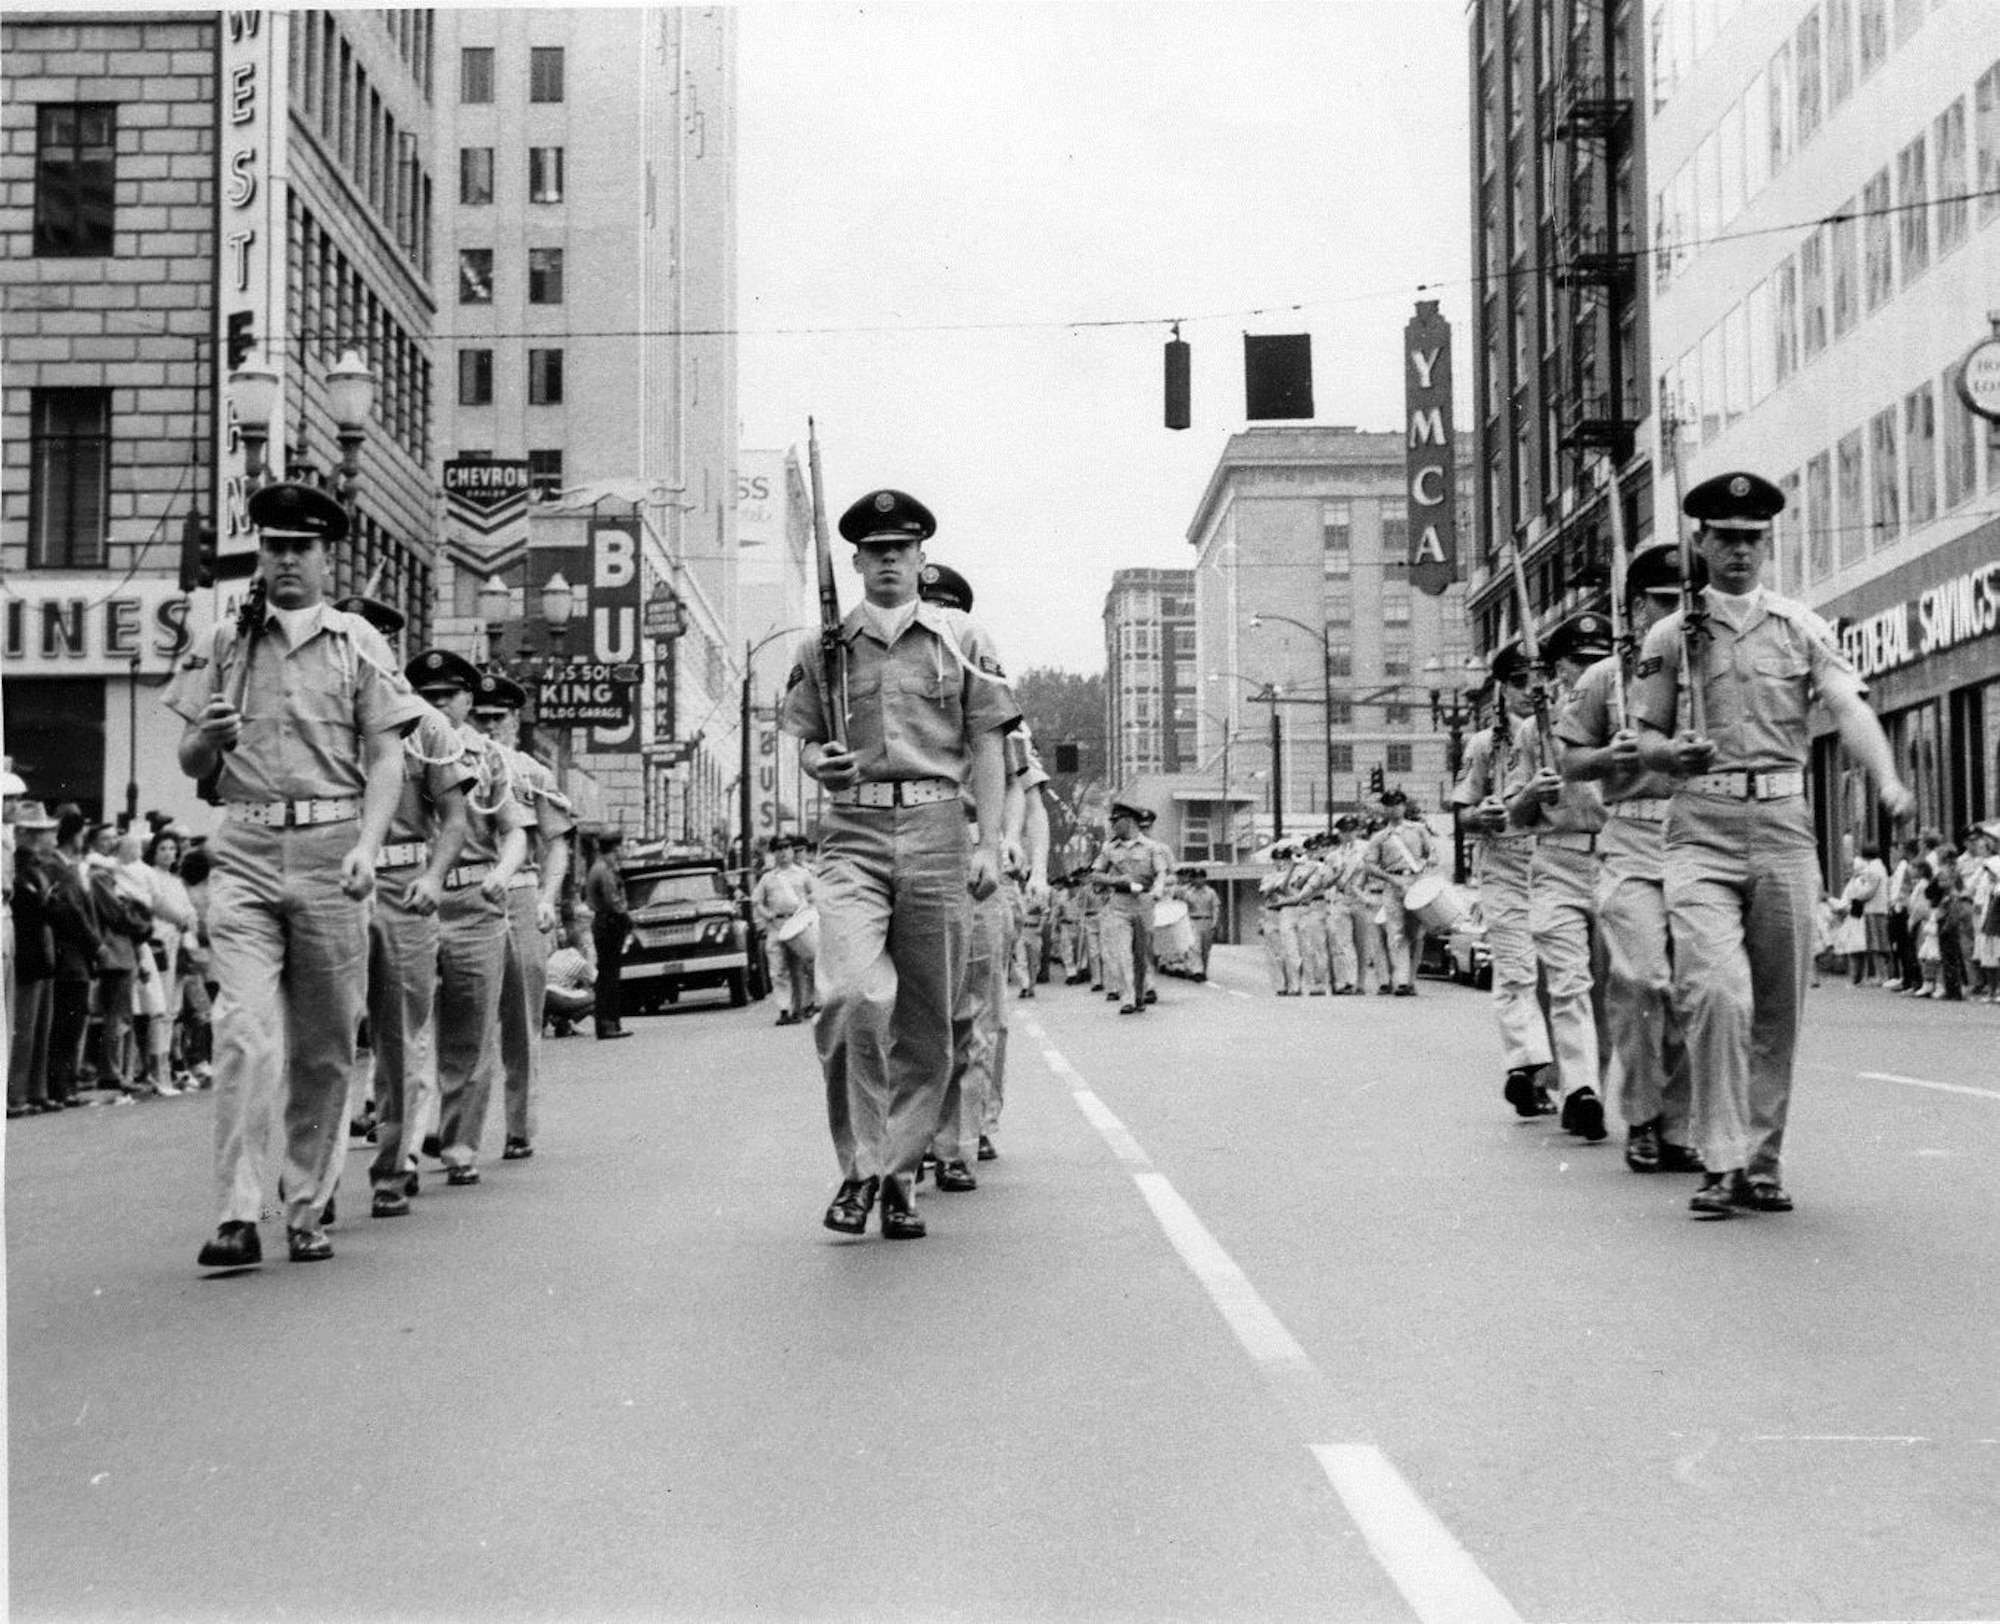 OreANG Precision Rifle Drill Team members march in khaki uniforms during the 11th Annual Armed Forces Day Parade in downtown Portland, May 20, 1961.  This picture was taken just before their precision maneuver in front of the official reviewing stand.  (142FW History Archives)